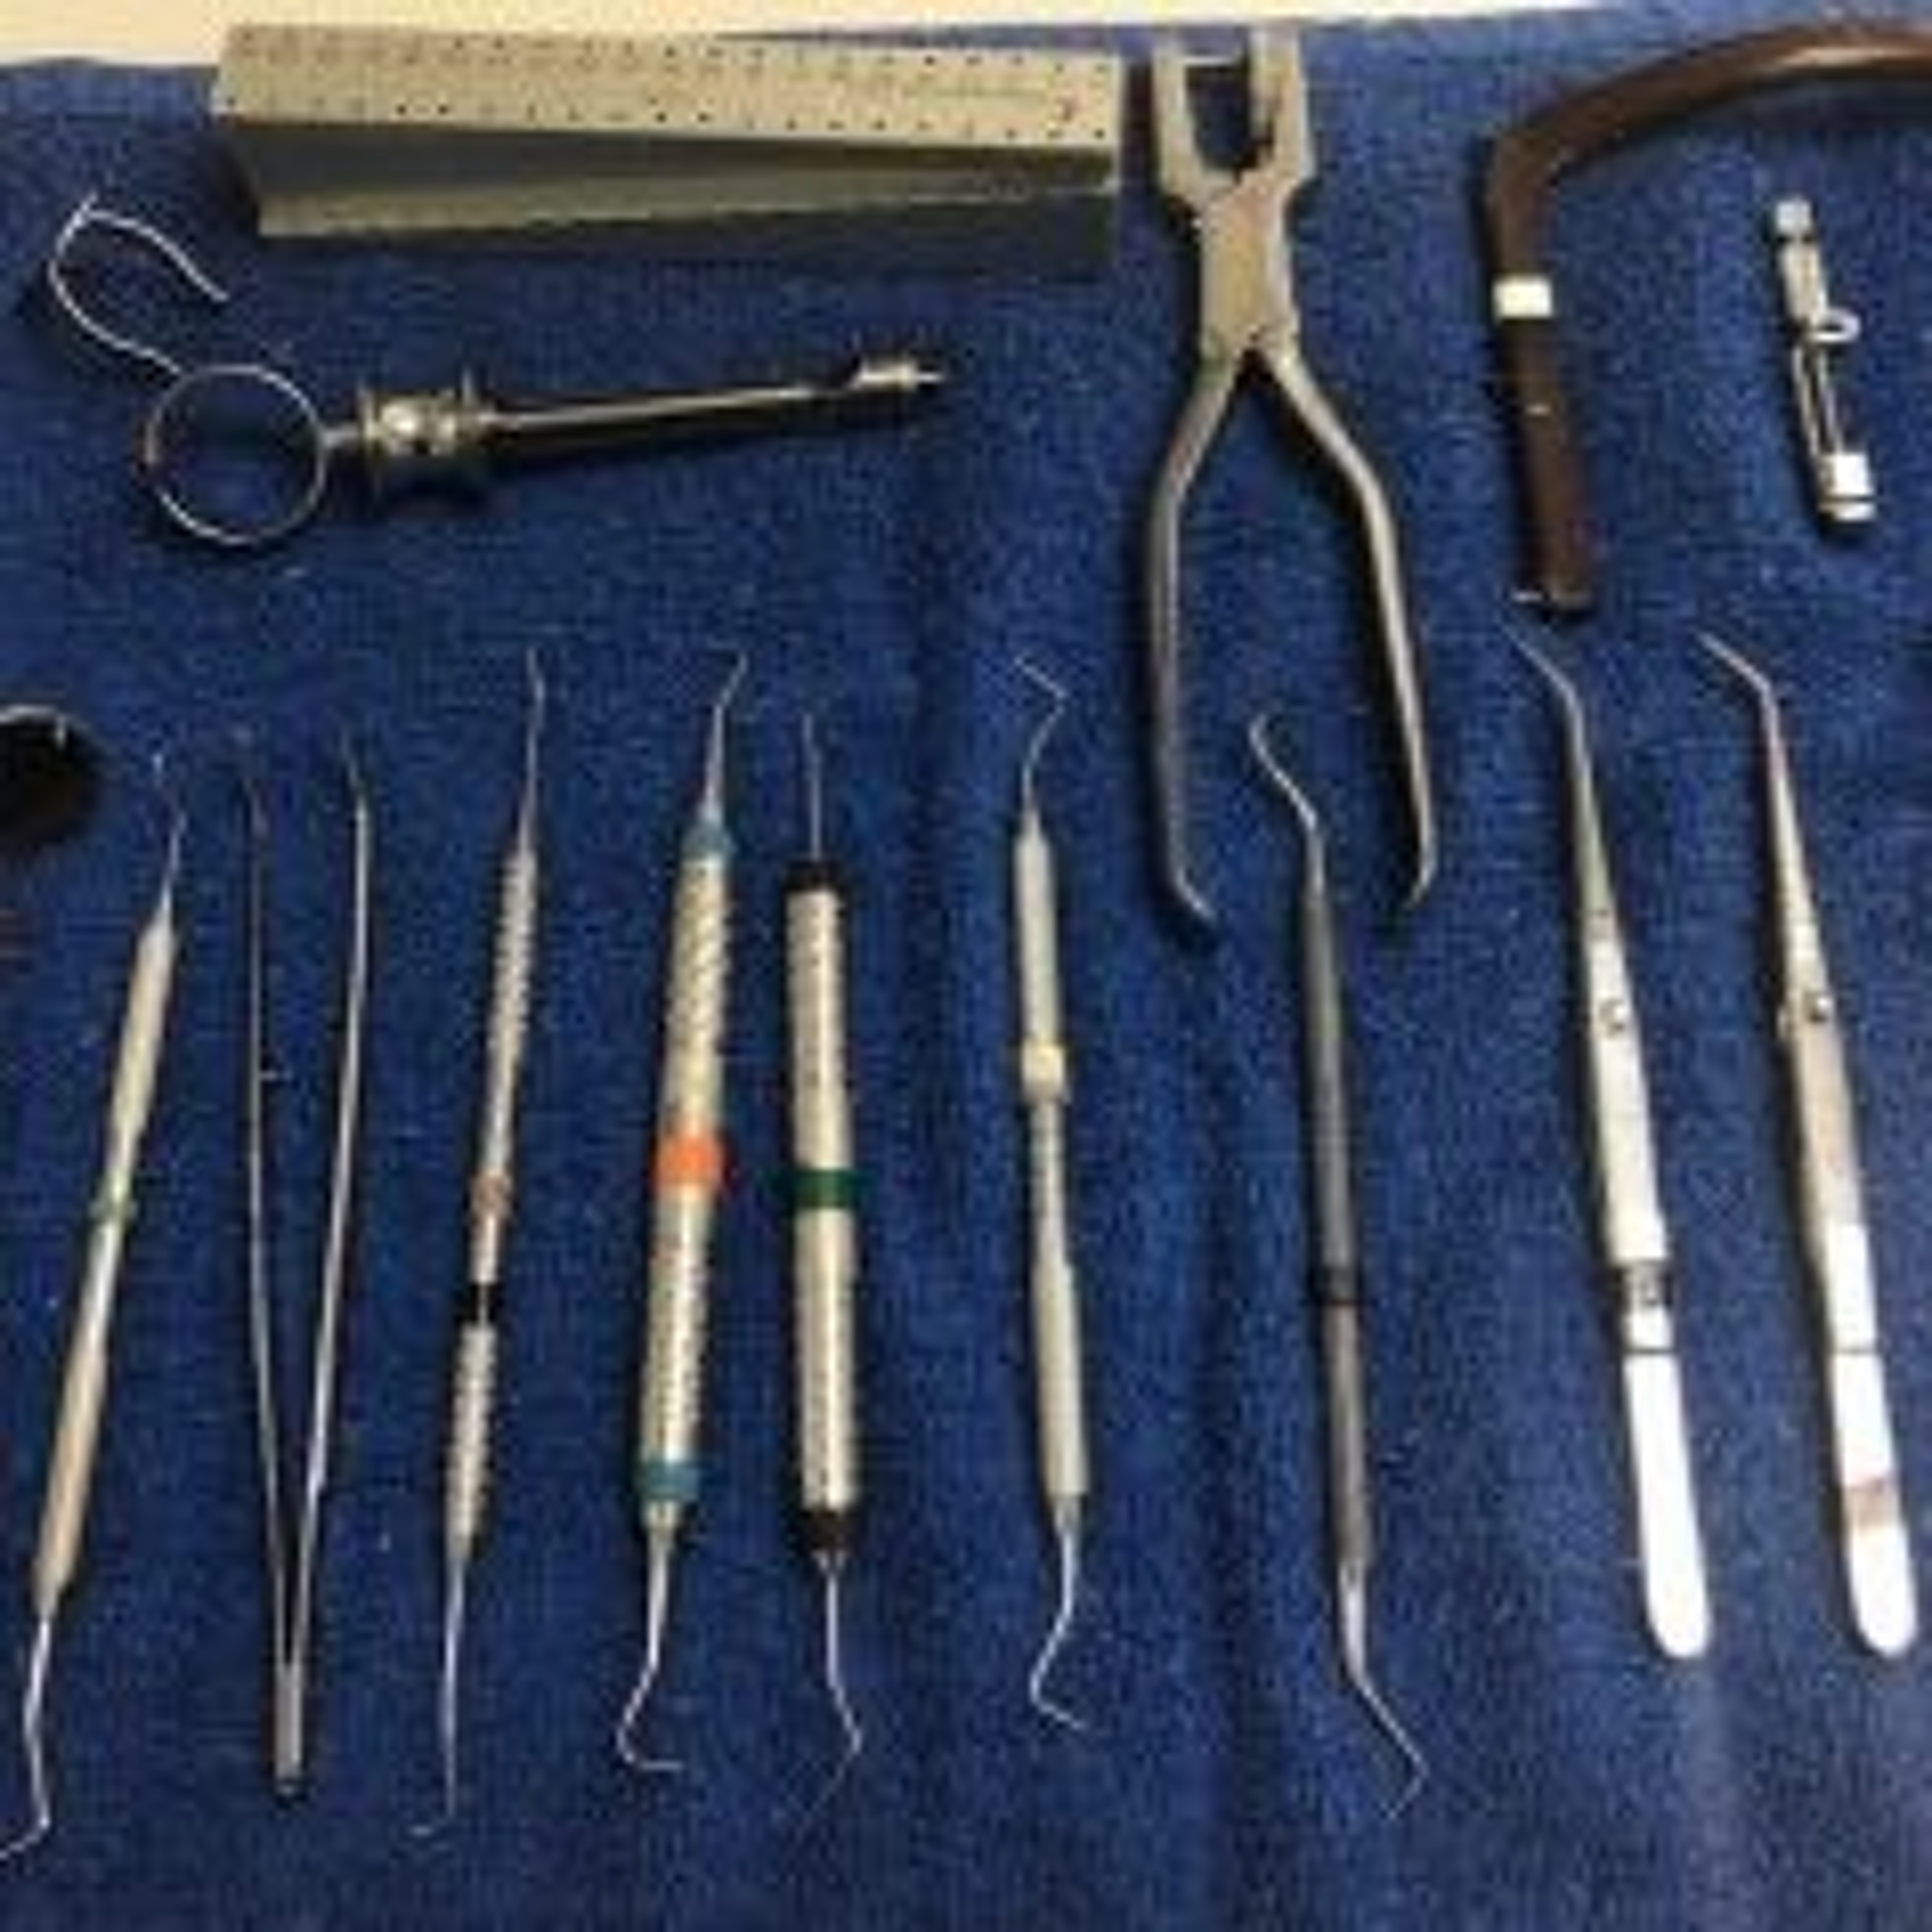 Episode 23 - Your Surgical Instruments Aren't As Clean As You Think